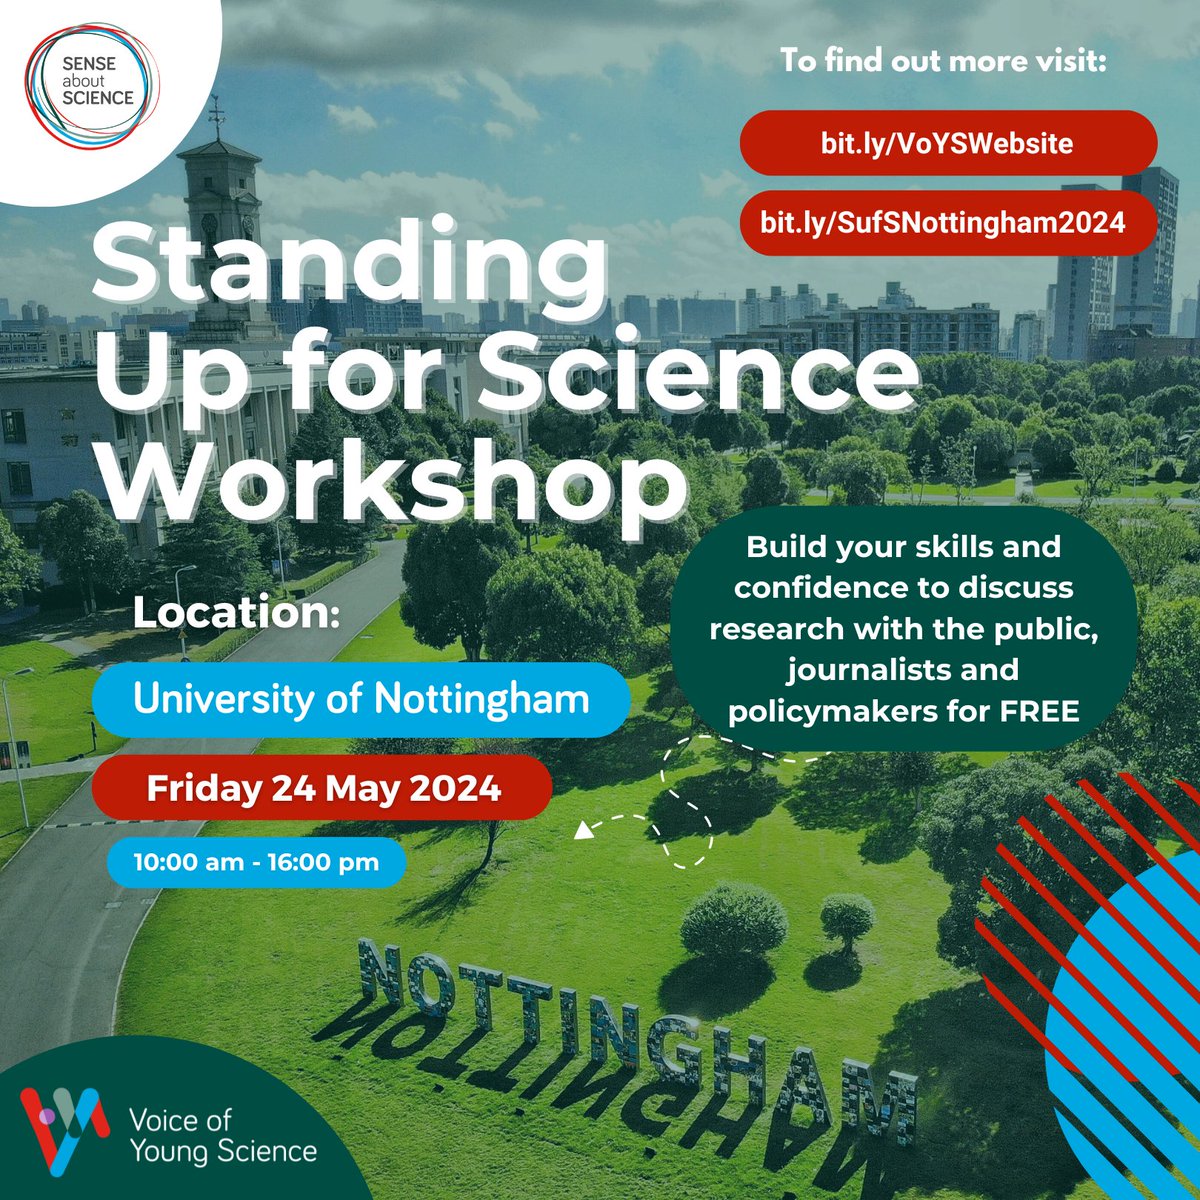 Apply for your free place at @voiceofyoungsci's ‘Standing up for Science’ workshop on 24 May at the University of Nottingham bit.ly/SufSNottingham…